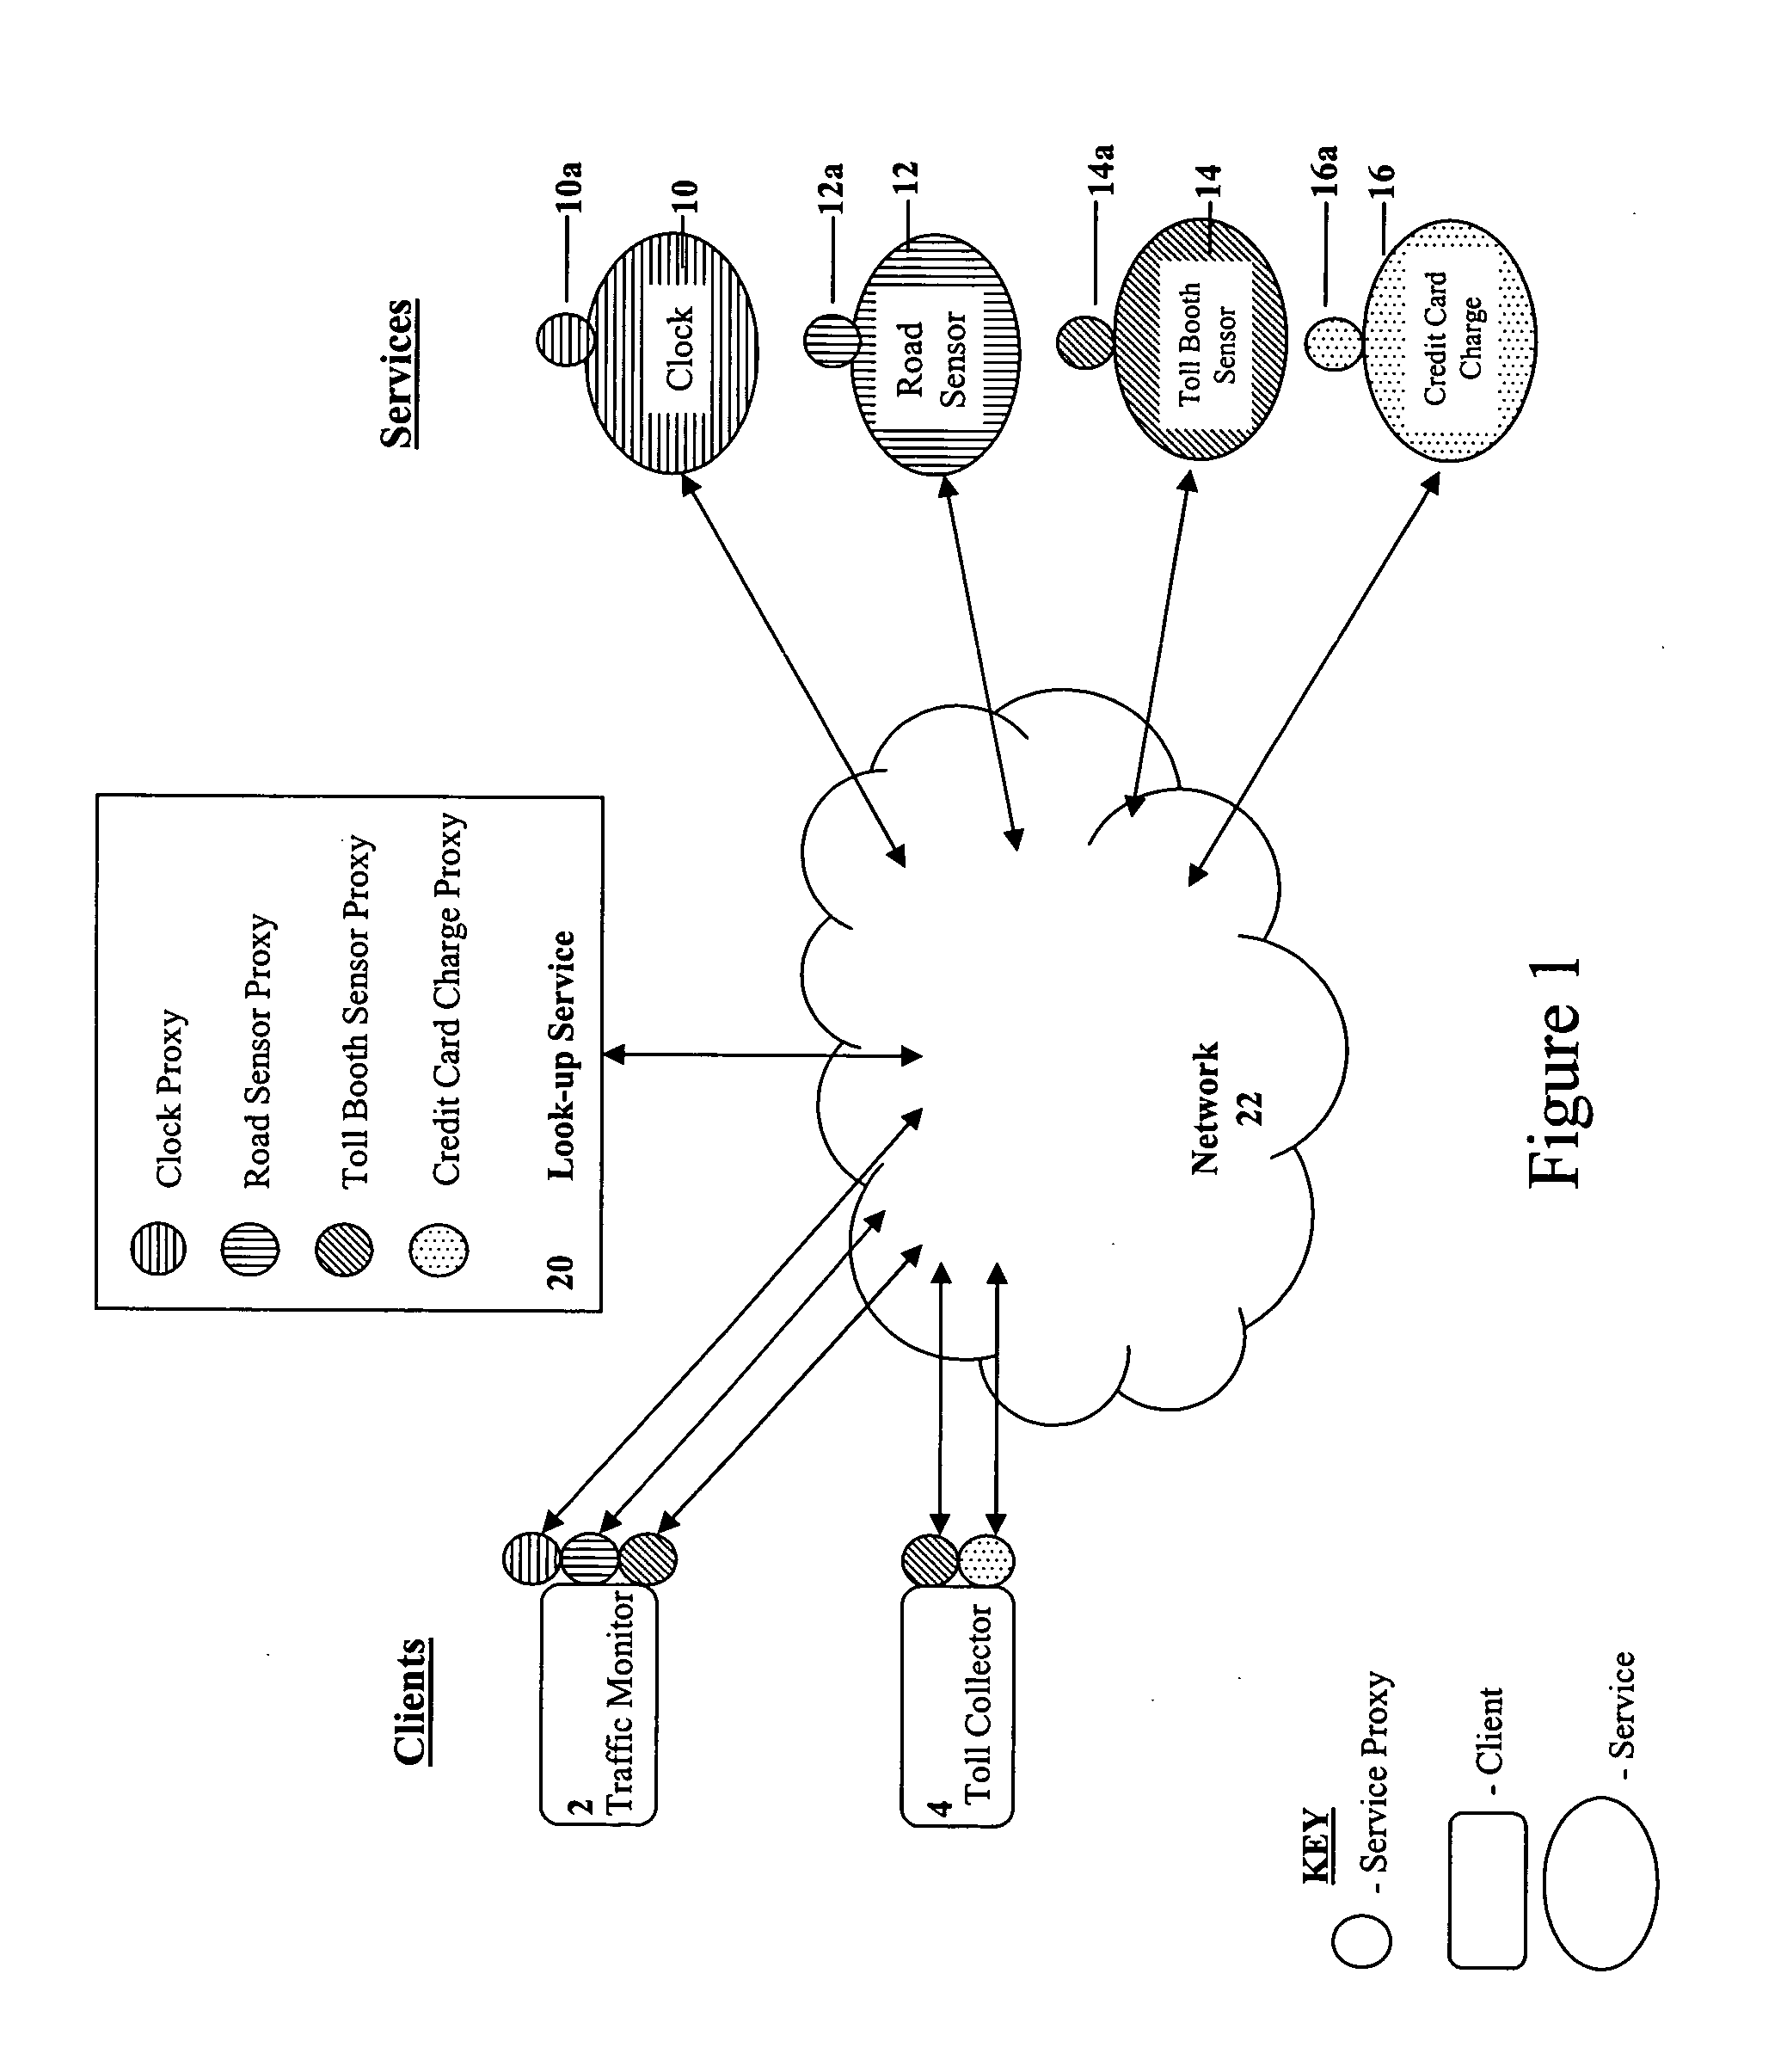 Method for a group of services to operate in two modes simultaneously